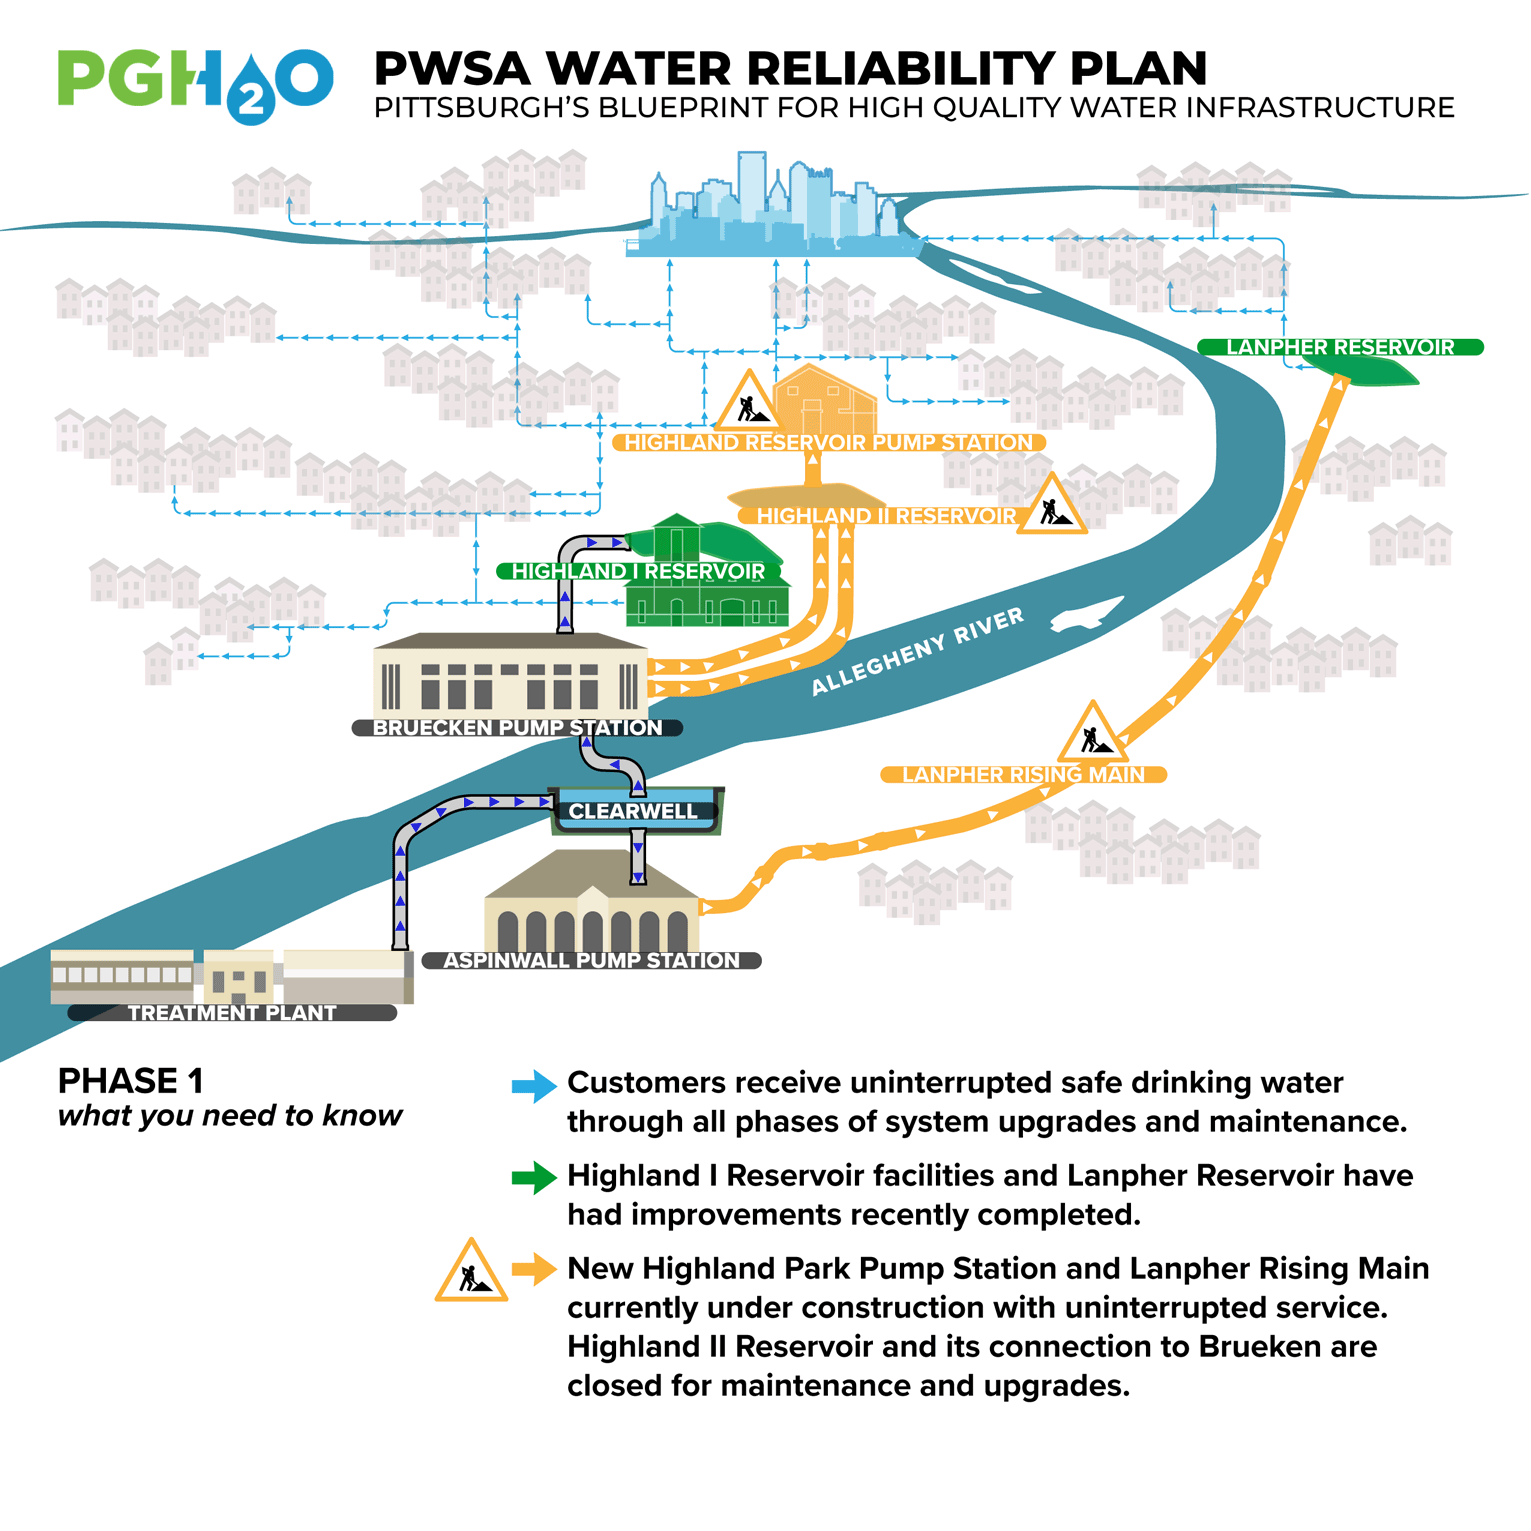 Animated GiF image of Water Reliability Plan